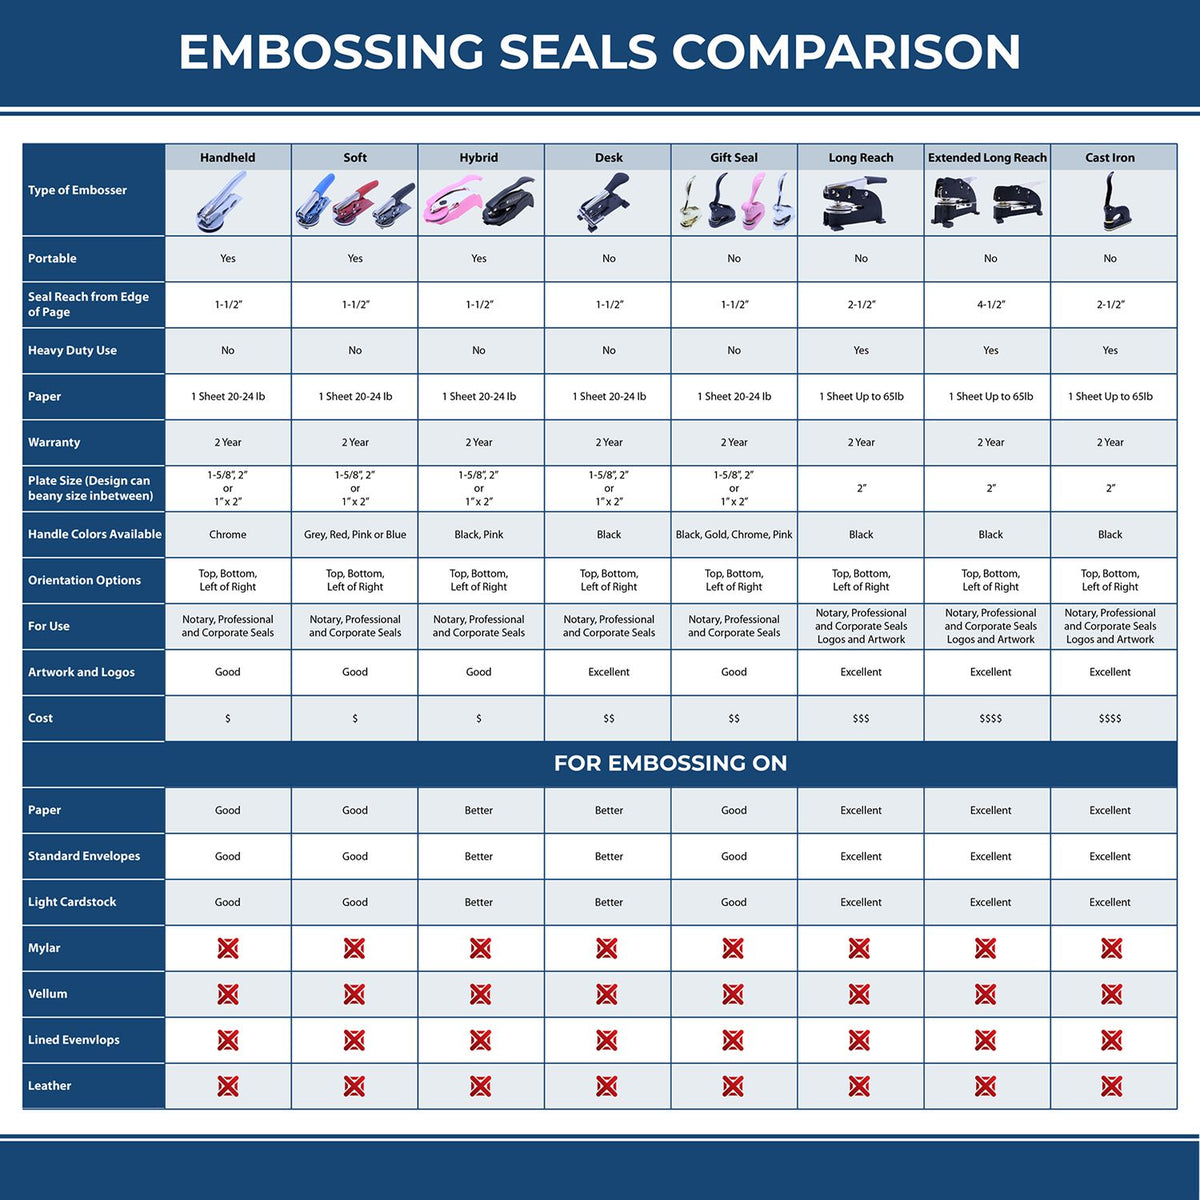 A comparison chart for the different types of mount models available for the Extended Long Reach Iowa Surveyor Embosser.